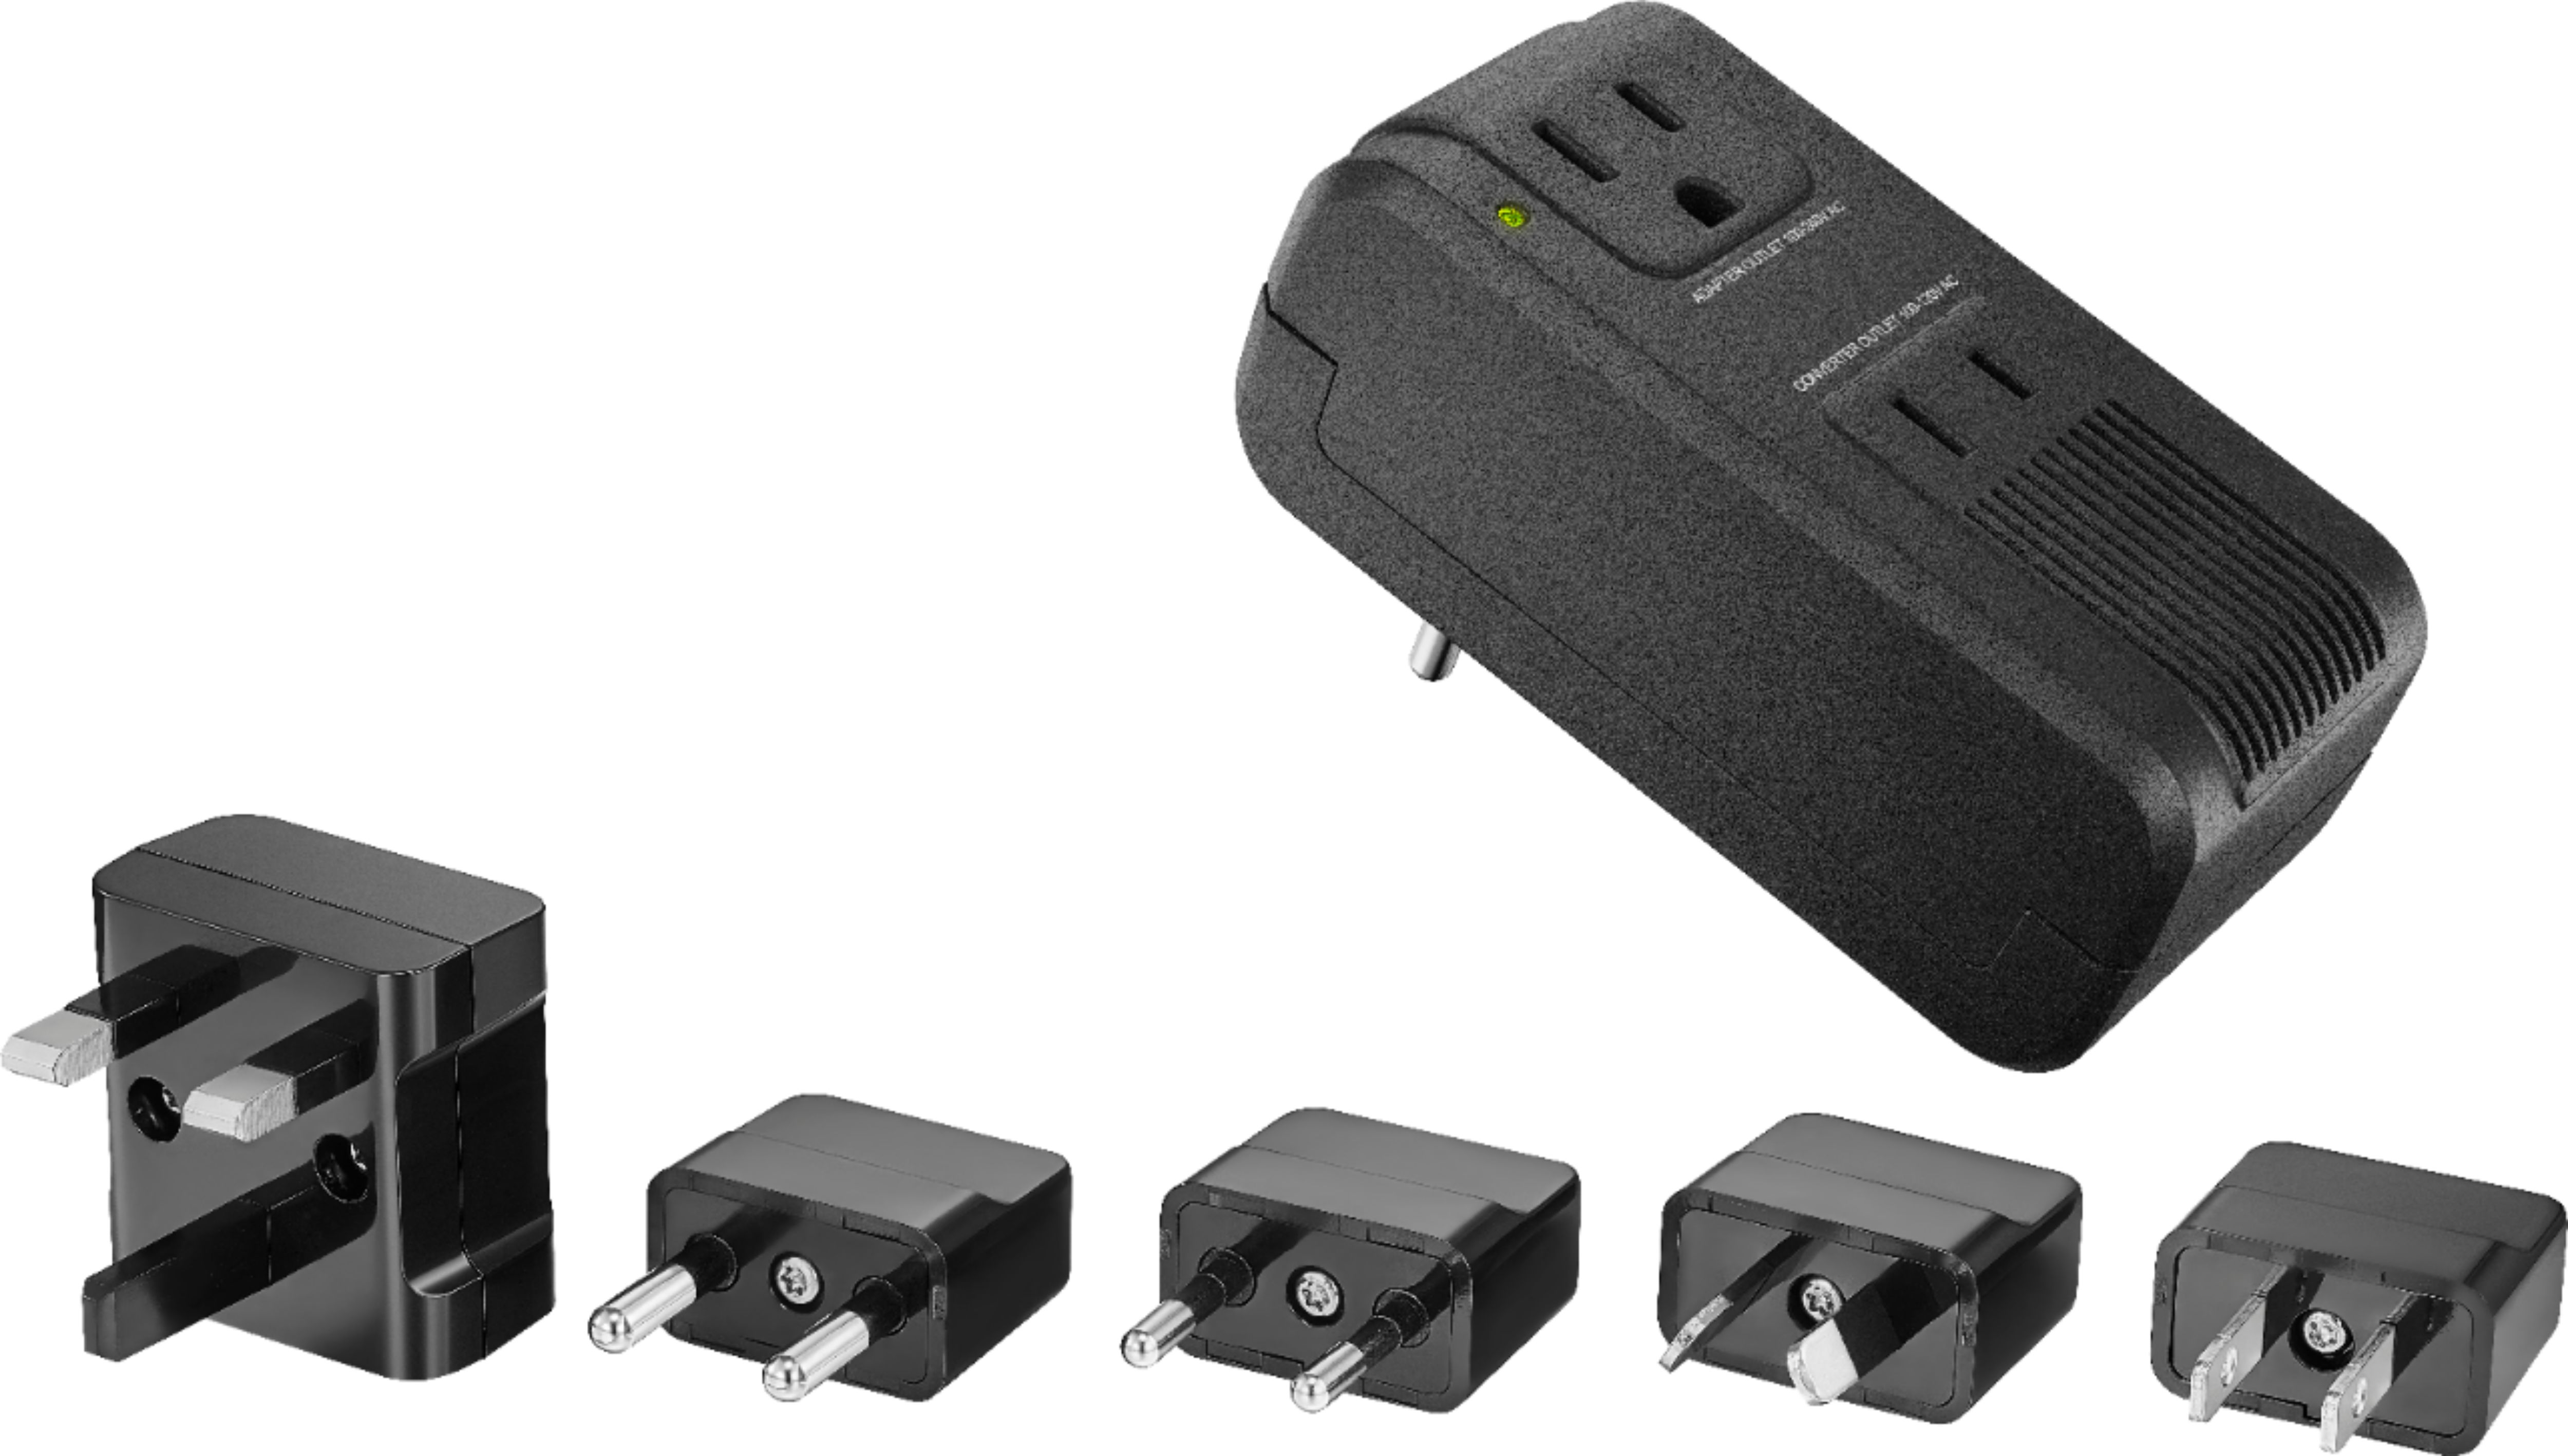 VINTAR  Focus on Travel Adapter and Power Strip –